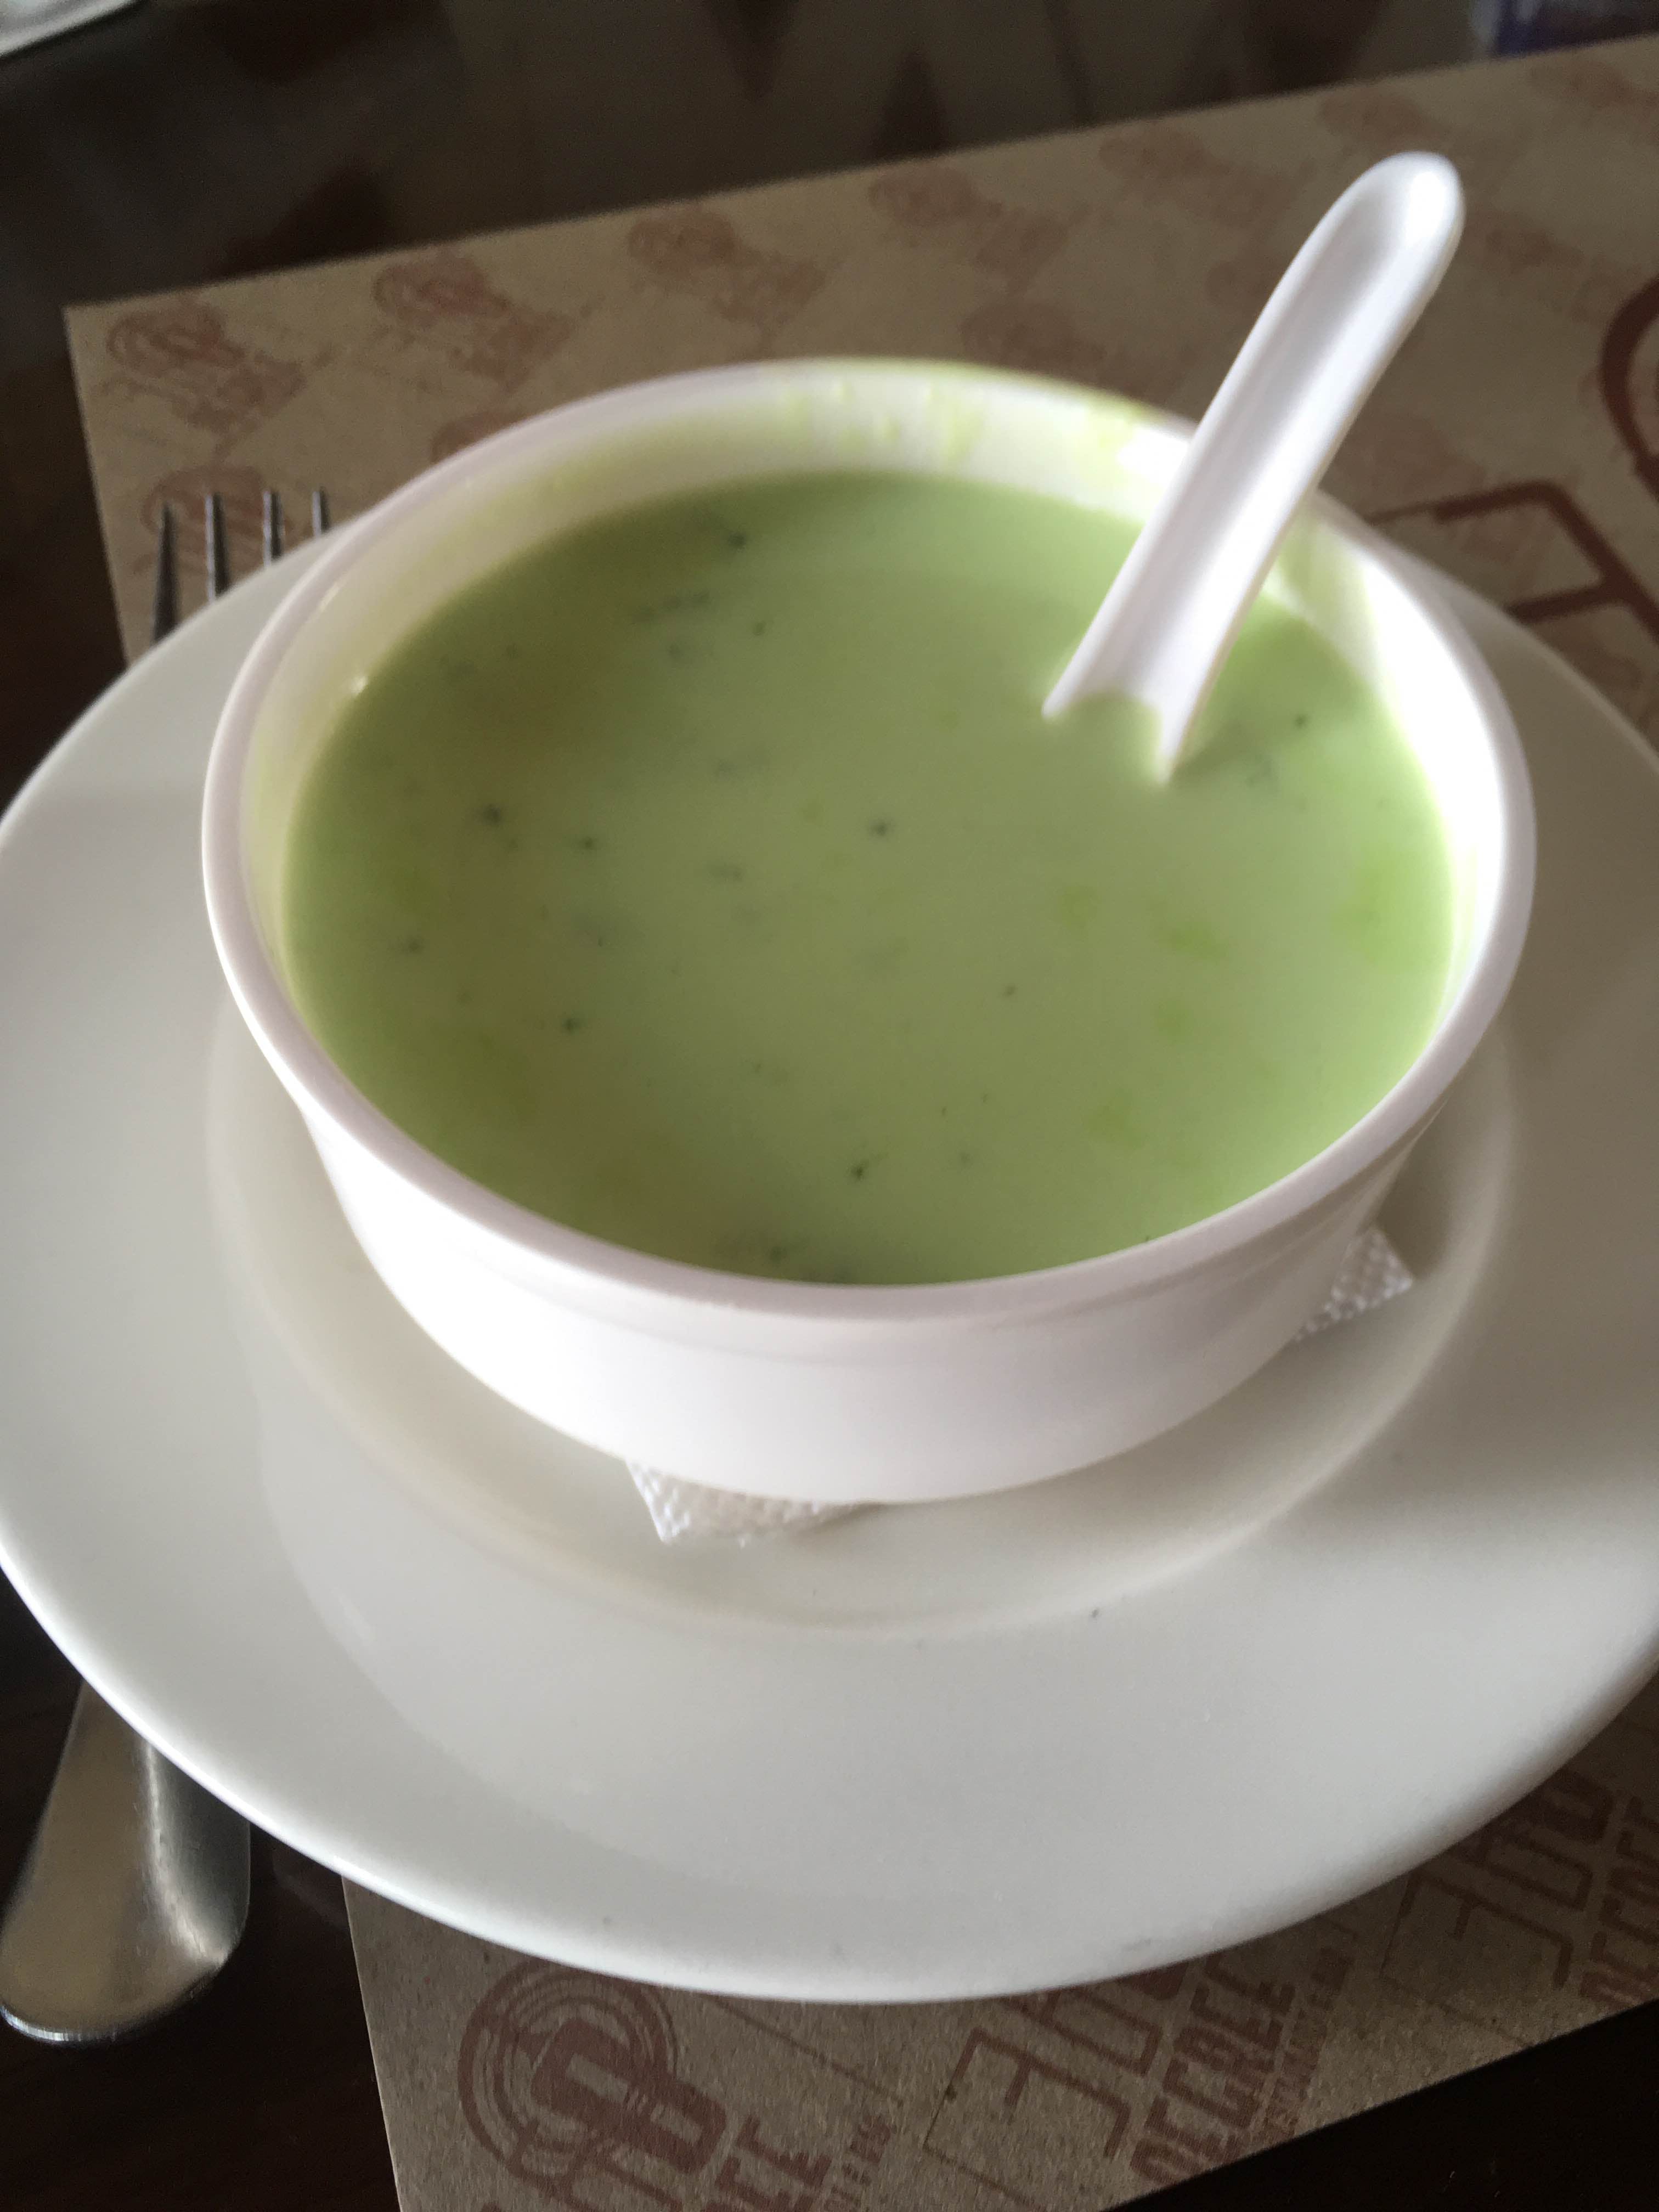 Green,Food,Dish,Cup,Drink,Soup,Cuisine,Sorrel soup,Ingredient,Cup